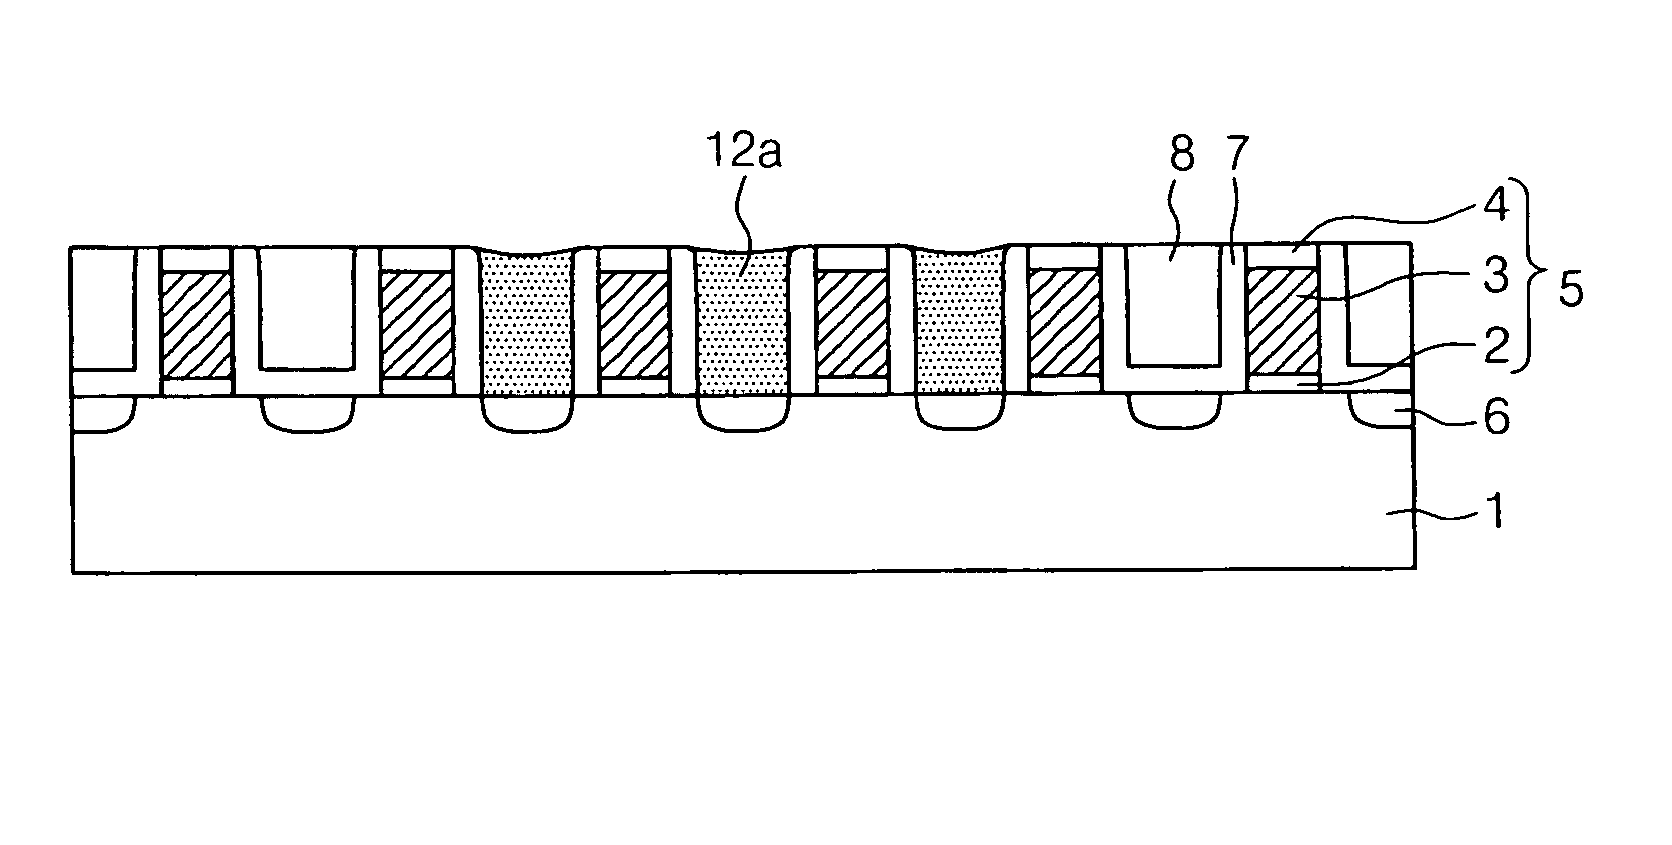 Method of forming an electrical contact in a semiconductor device using an improved self-aligned contact (SAC) process